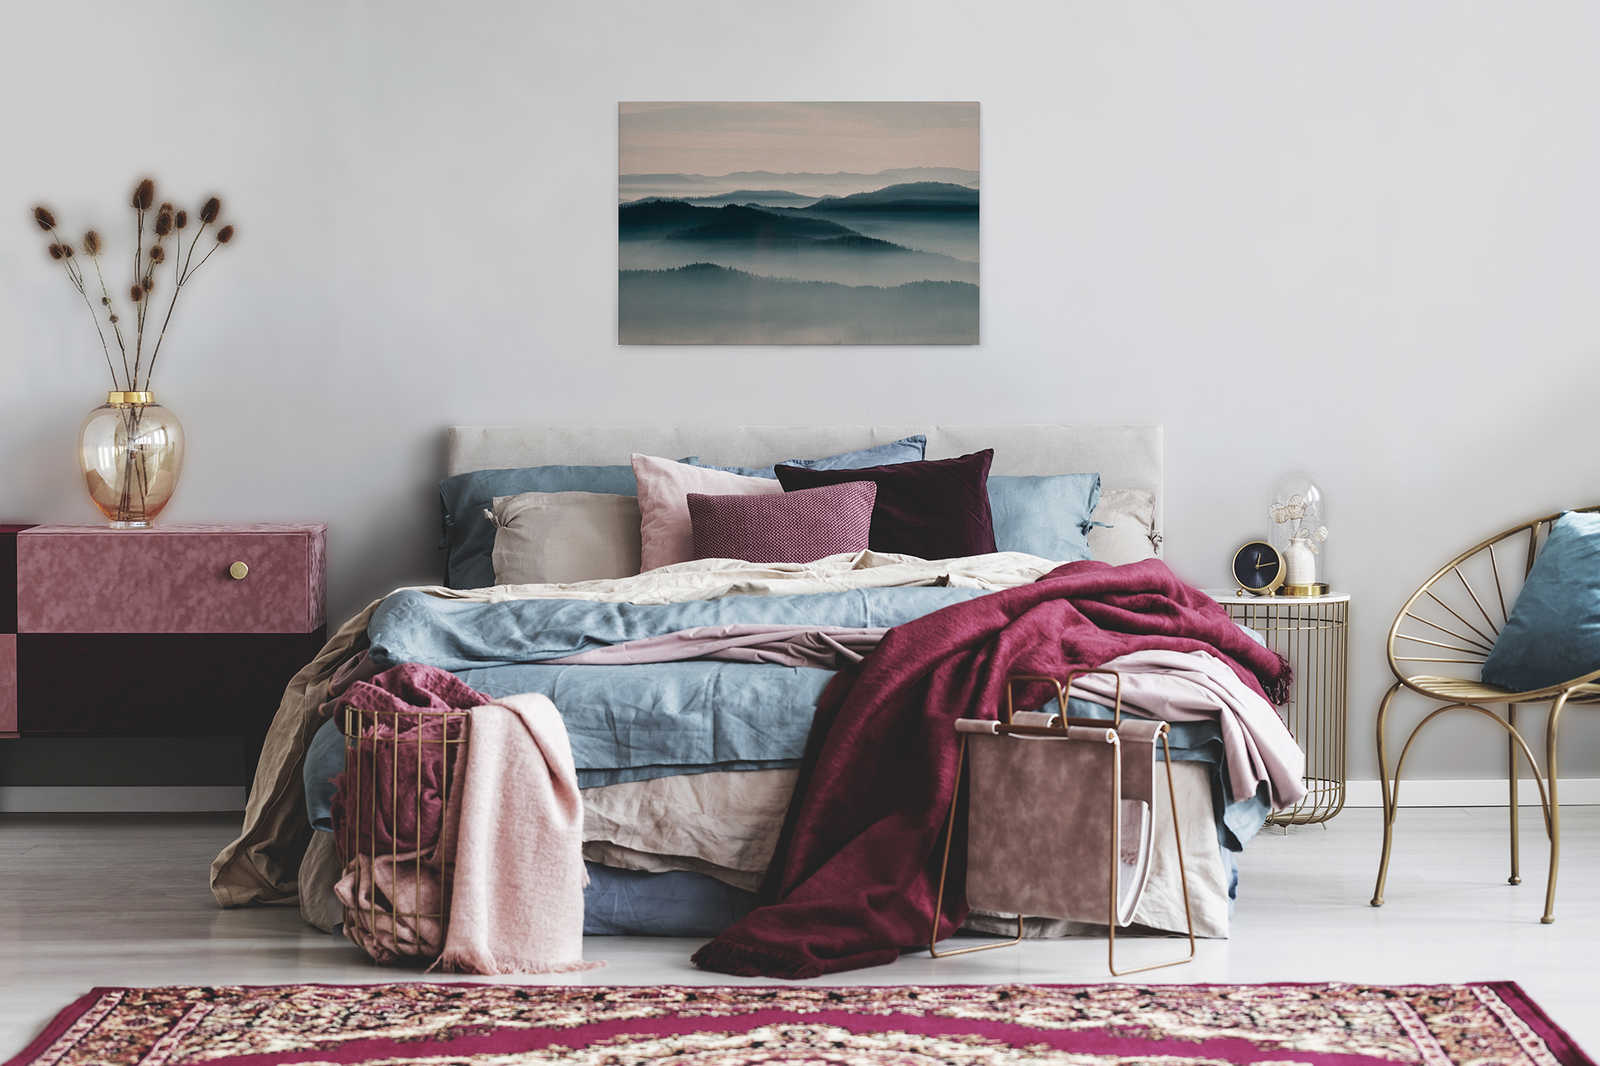             Horizon 1 - Canvas painting with fog landscape, nature Sky Line in cardboard structure - 0.90 m x 0.60 m
        